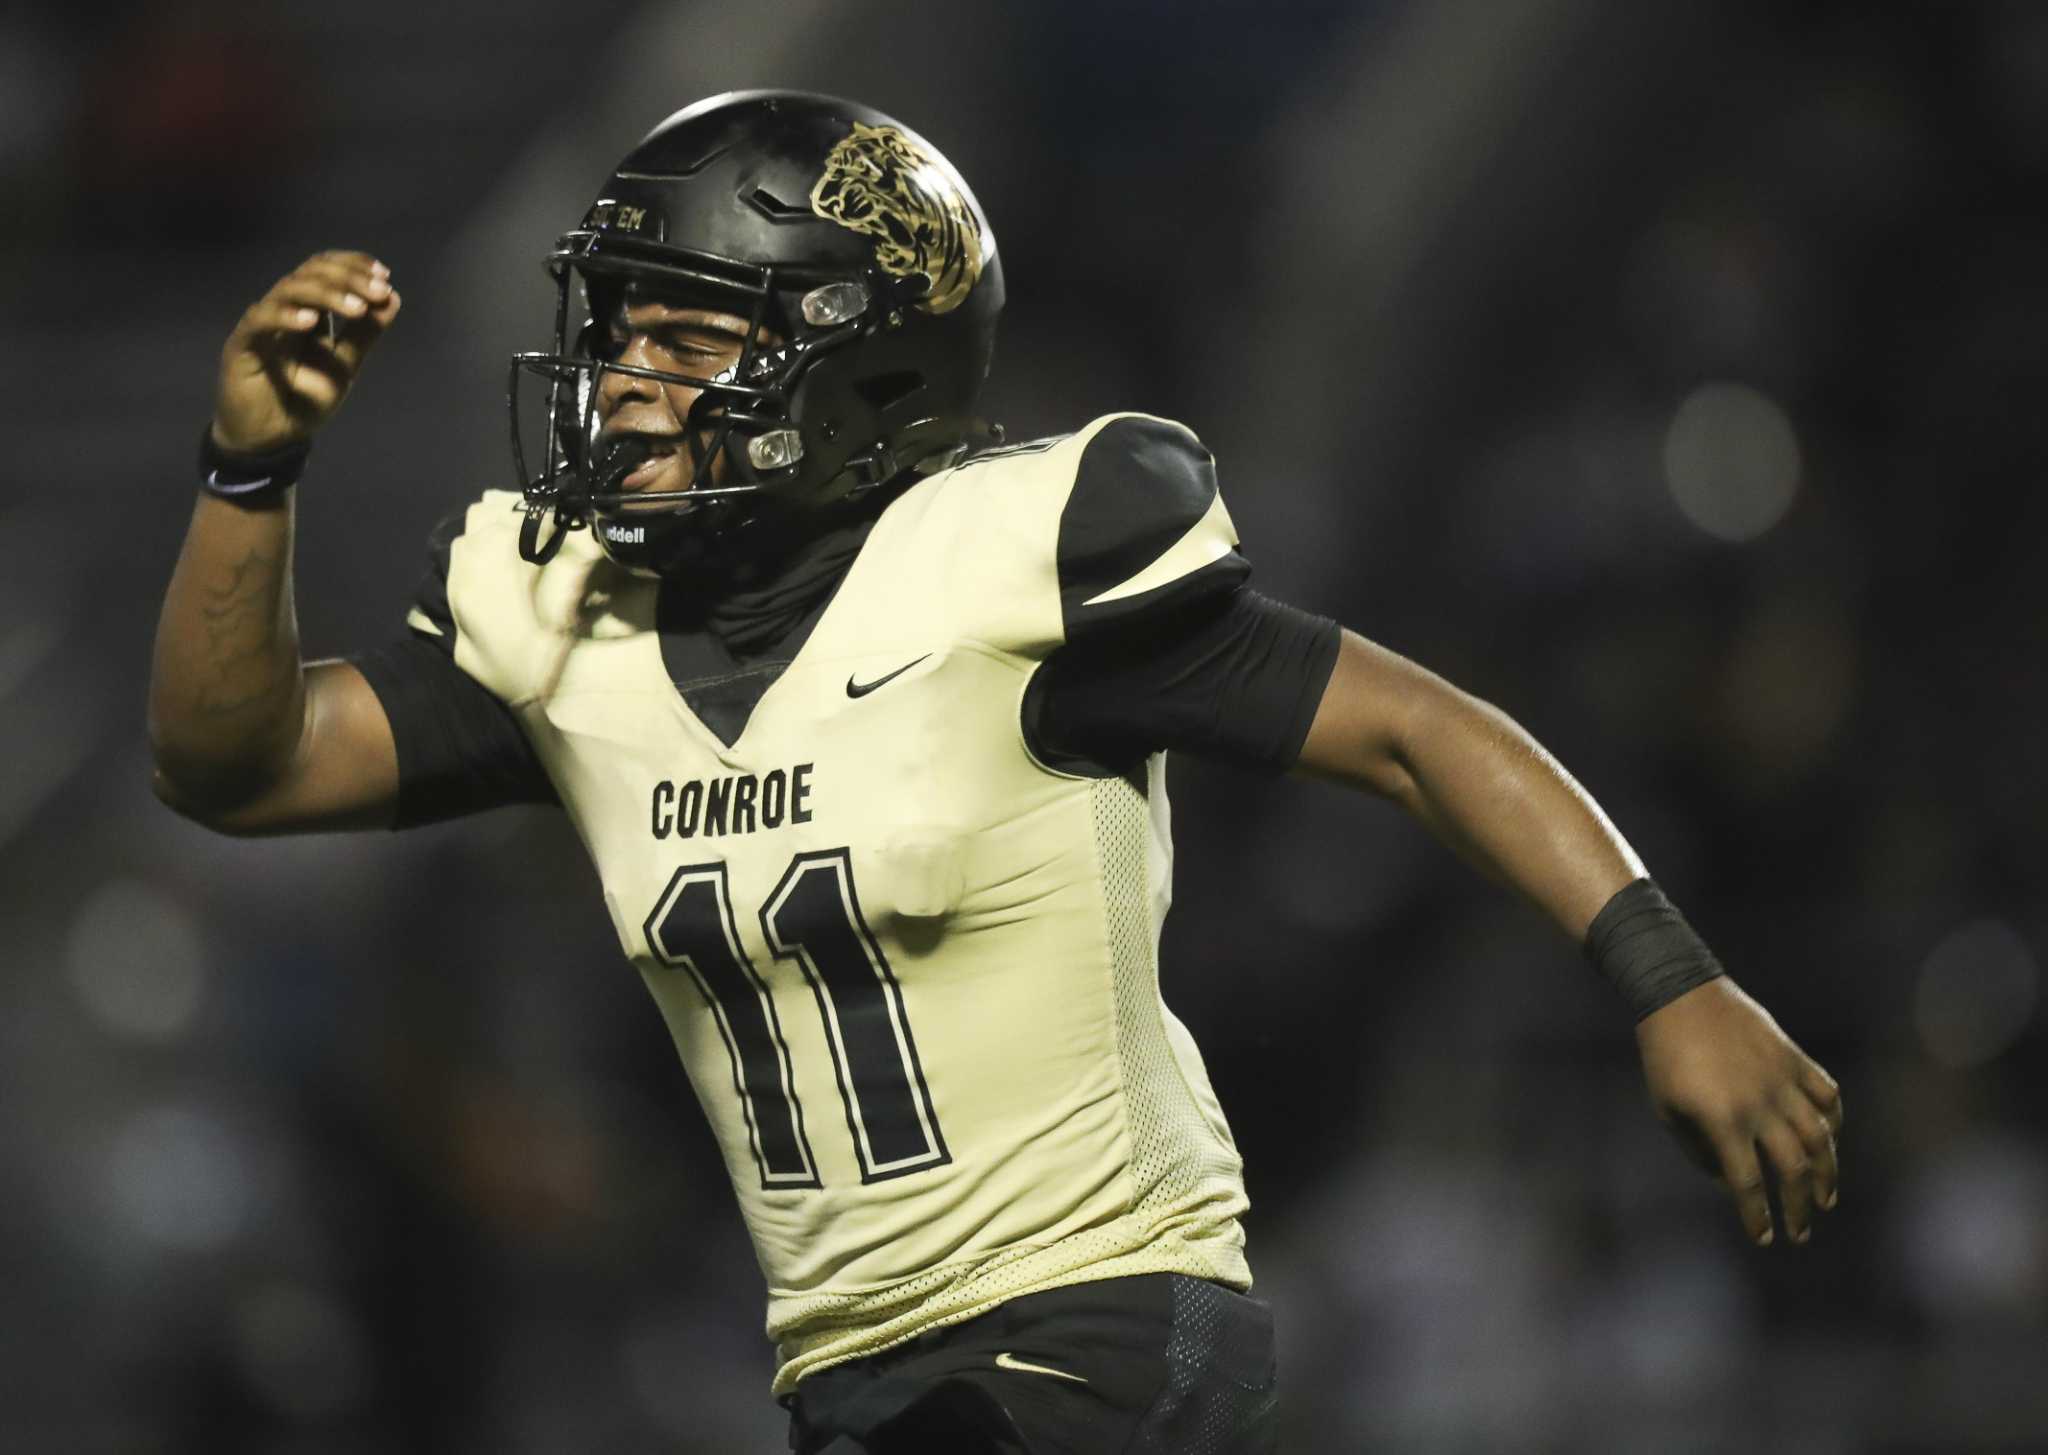 Conroe scores late to take homecoming win over Willis